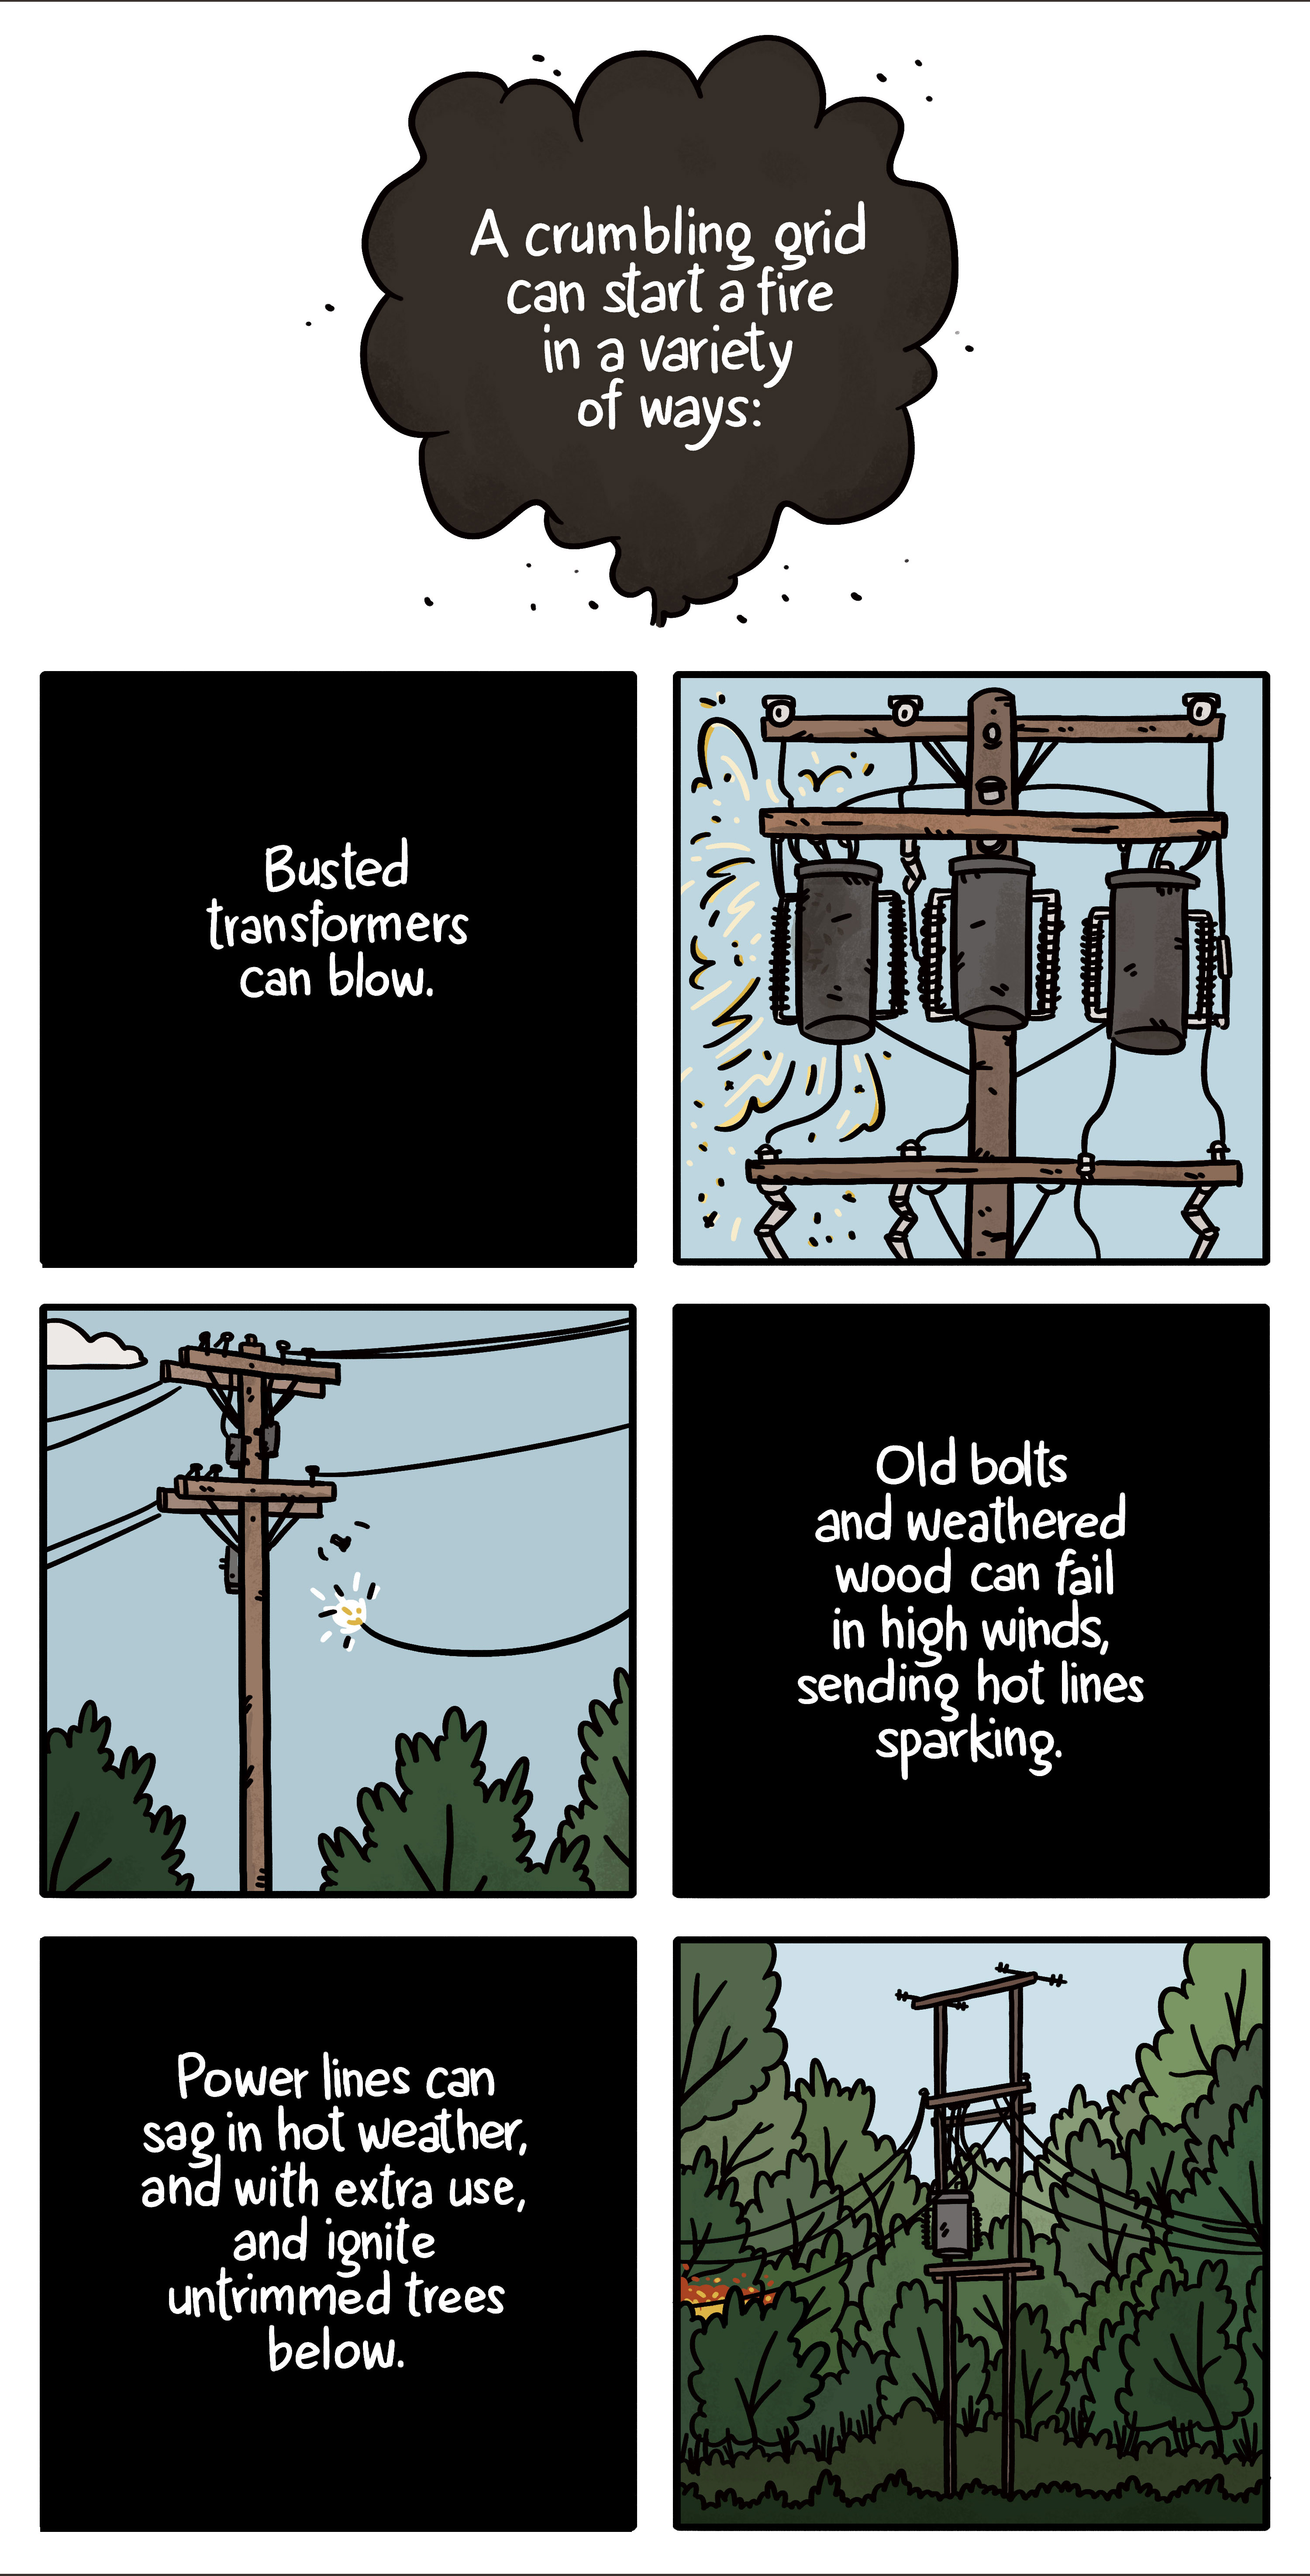 Illustration demonstration a few ways that old power lines can cause fires: Transformers can explode, old bolts and hardware can break, sending sparking power lines to the ground, or old power poles can sag, letting power lines mix with overgrown foliage